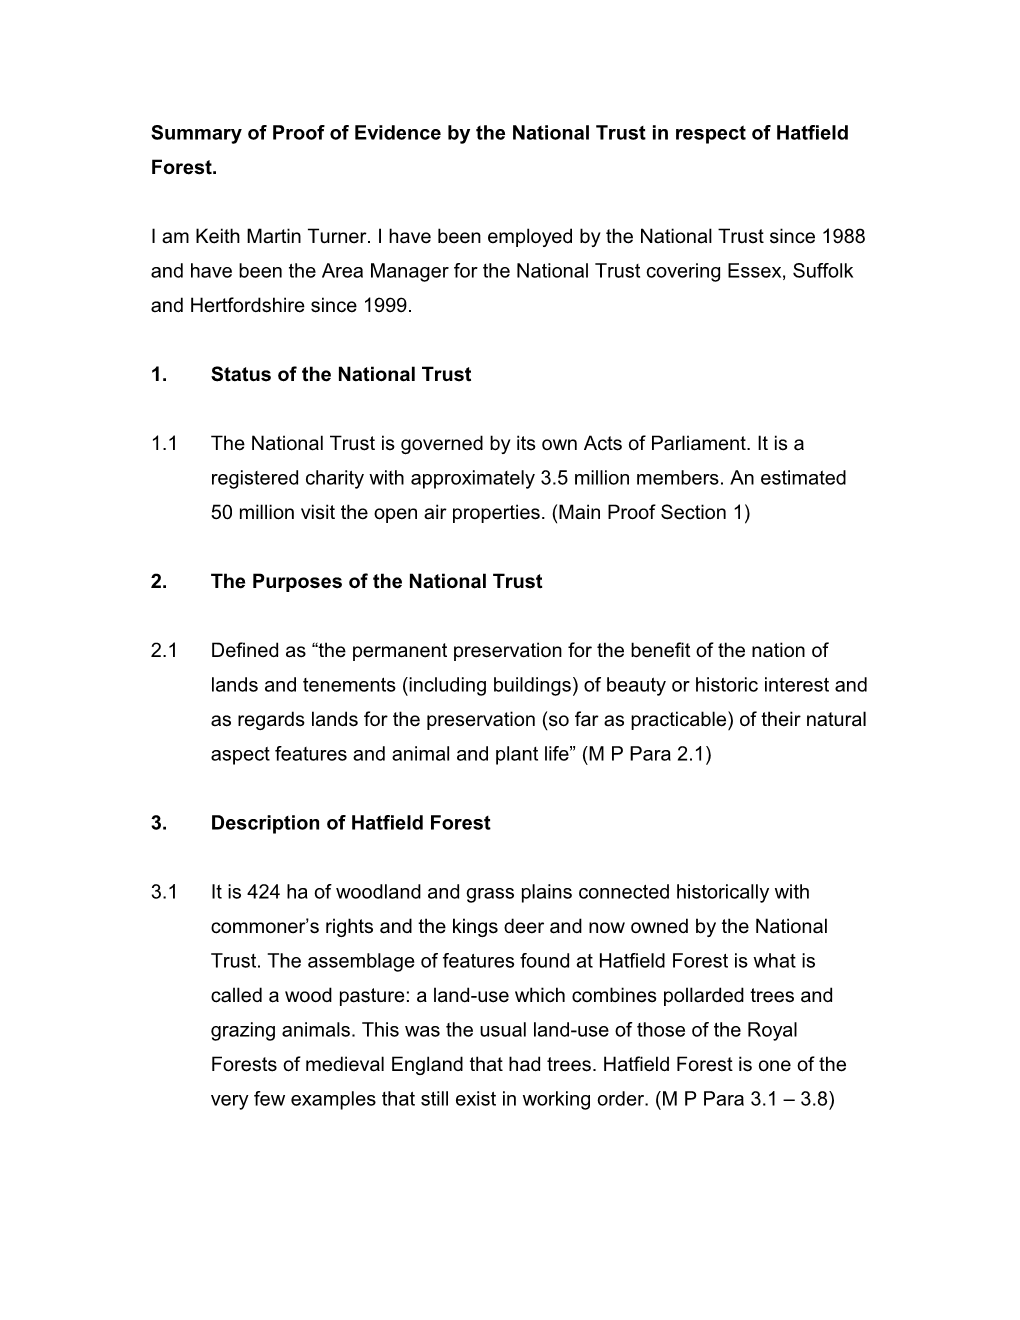 Summary of Proof of Evidence by the National Trust in Respect of Hatfield Forest